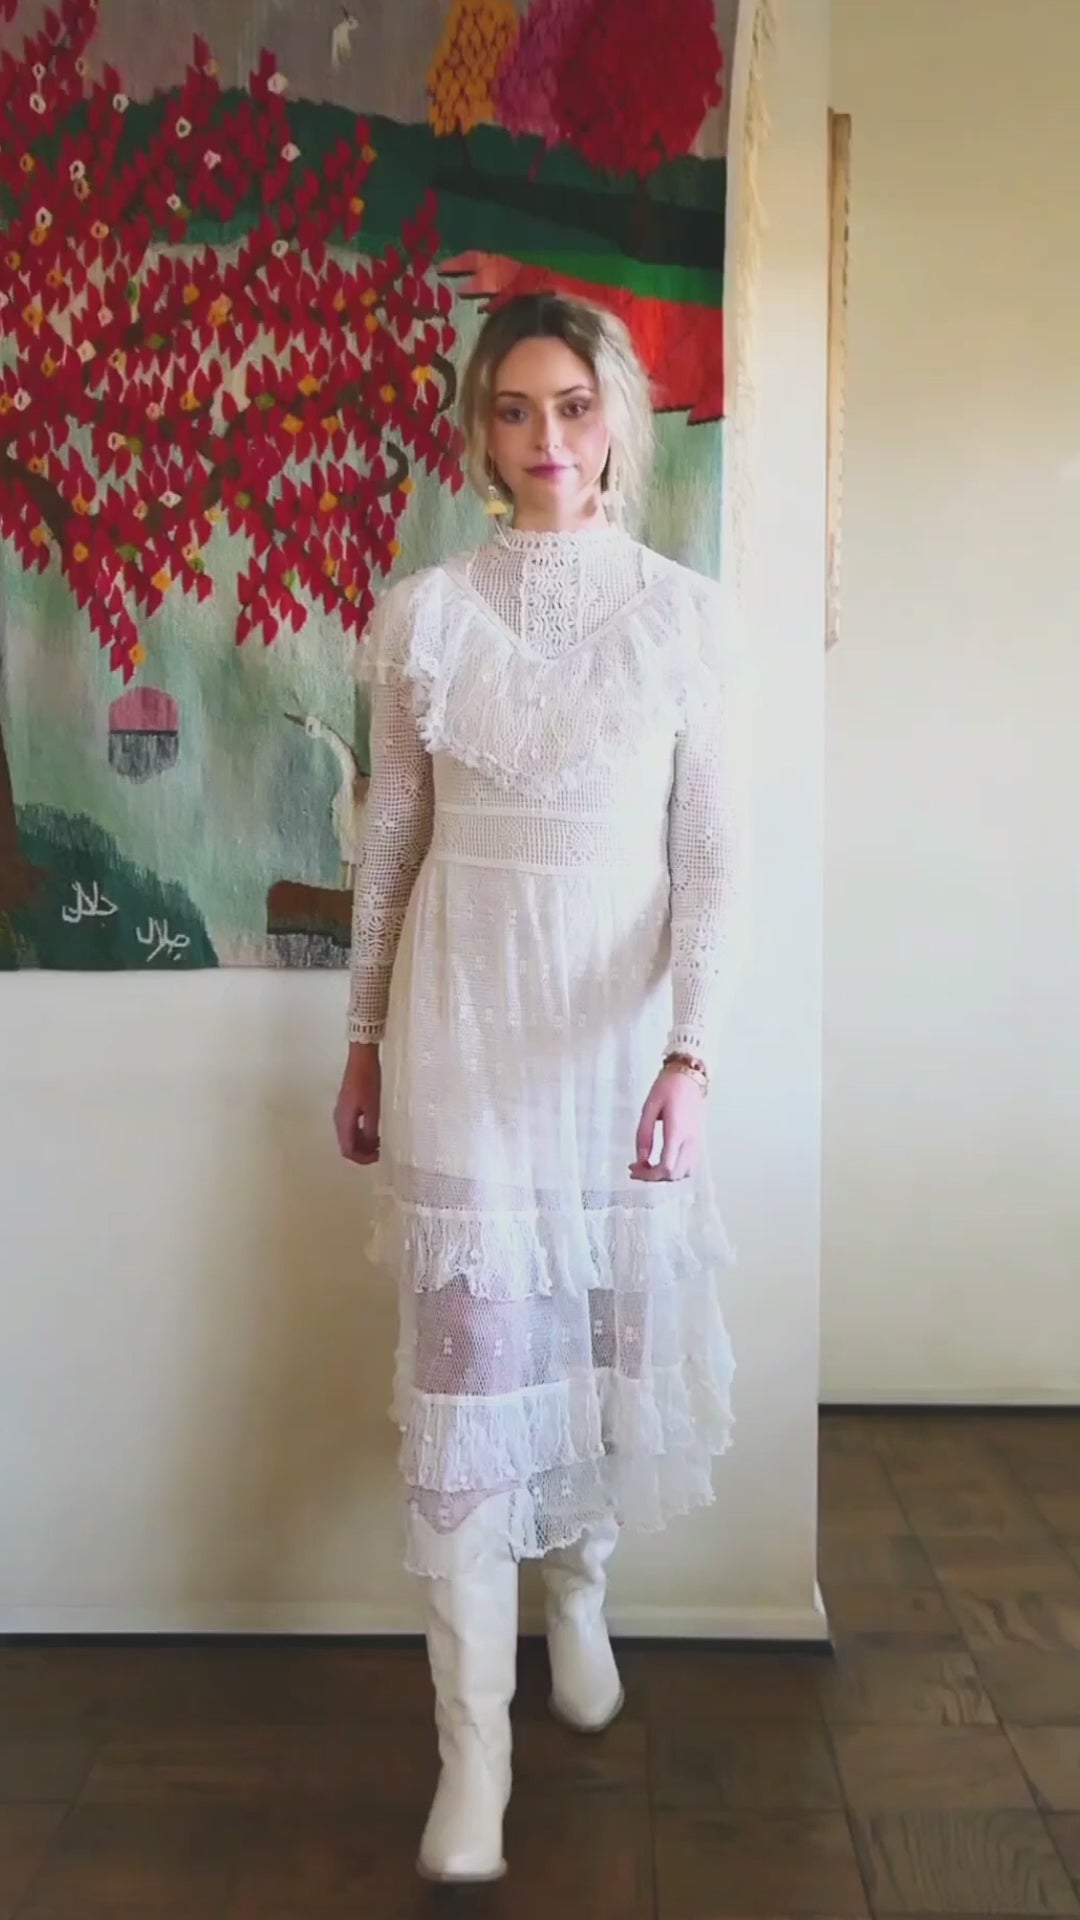 Video of model wearing Lim's white vintage crochet maxi dress with ruffles at the collar and two tiered hem.  